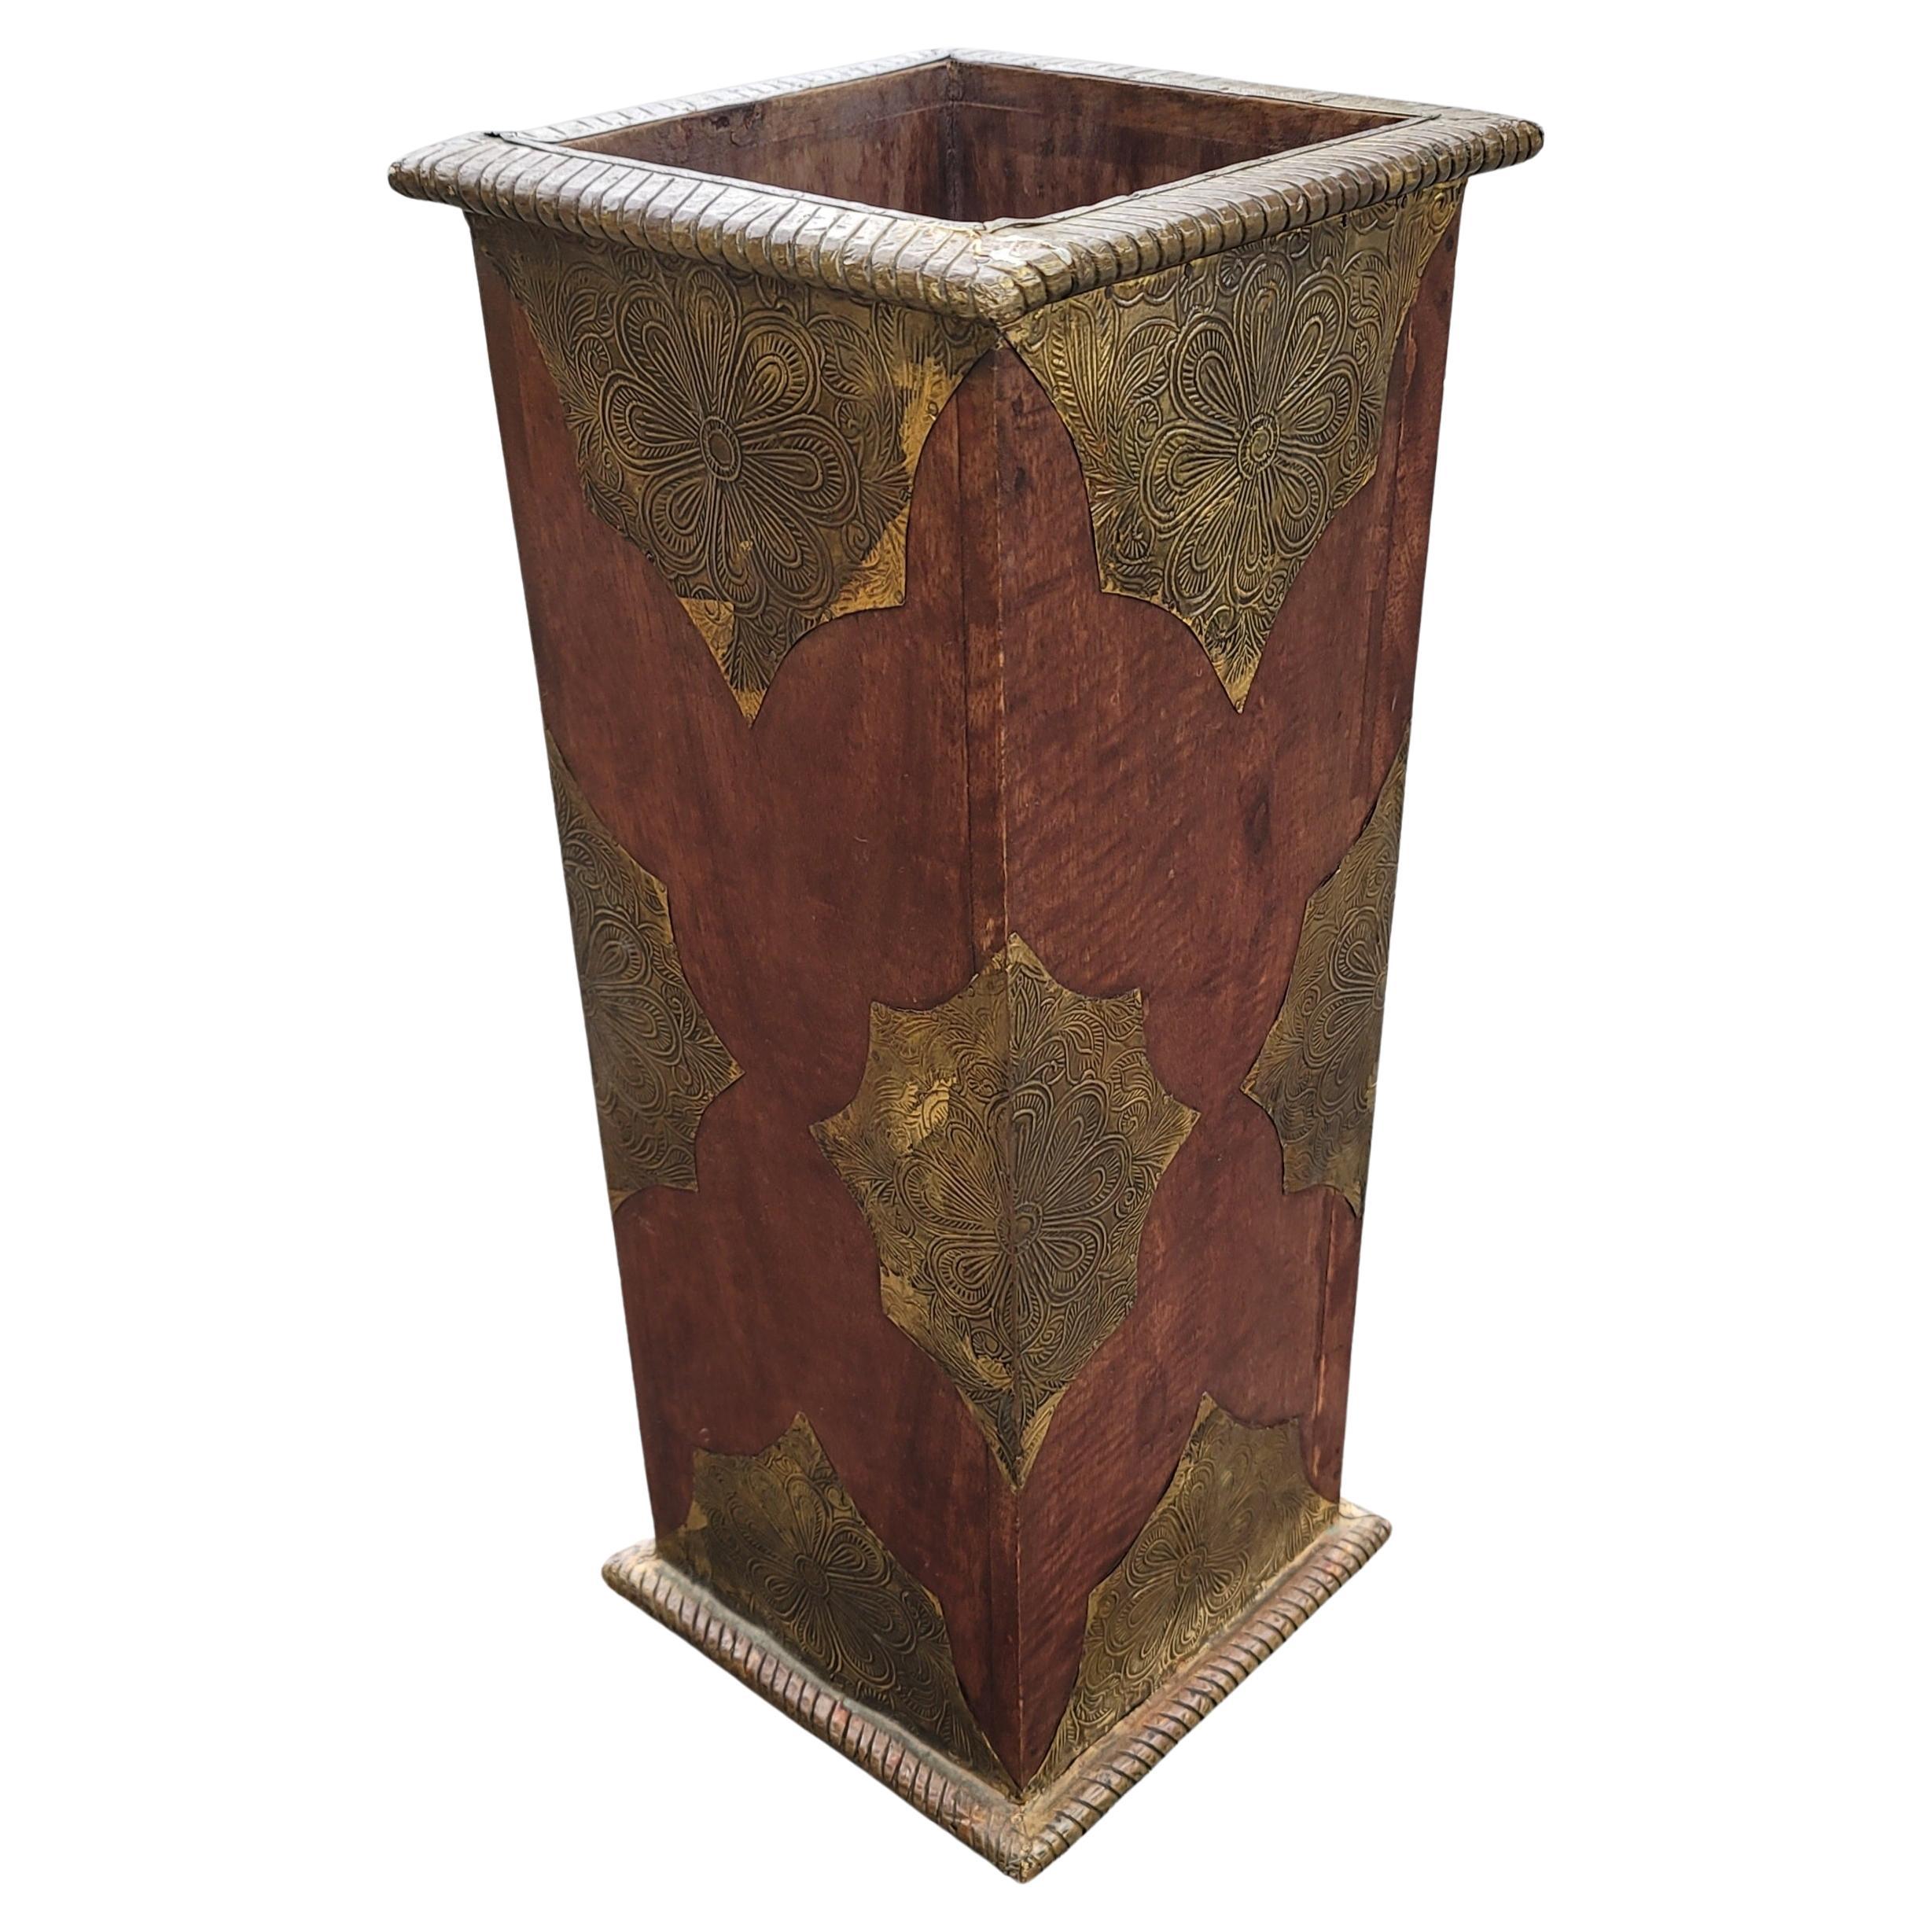 Hand-Crafted Mid-Century Modern Mango Wood with Mounted Brass Sheeting Ornate Umbrella Stand For Sale